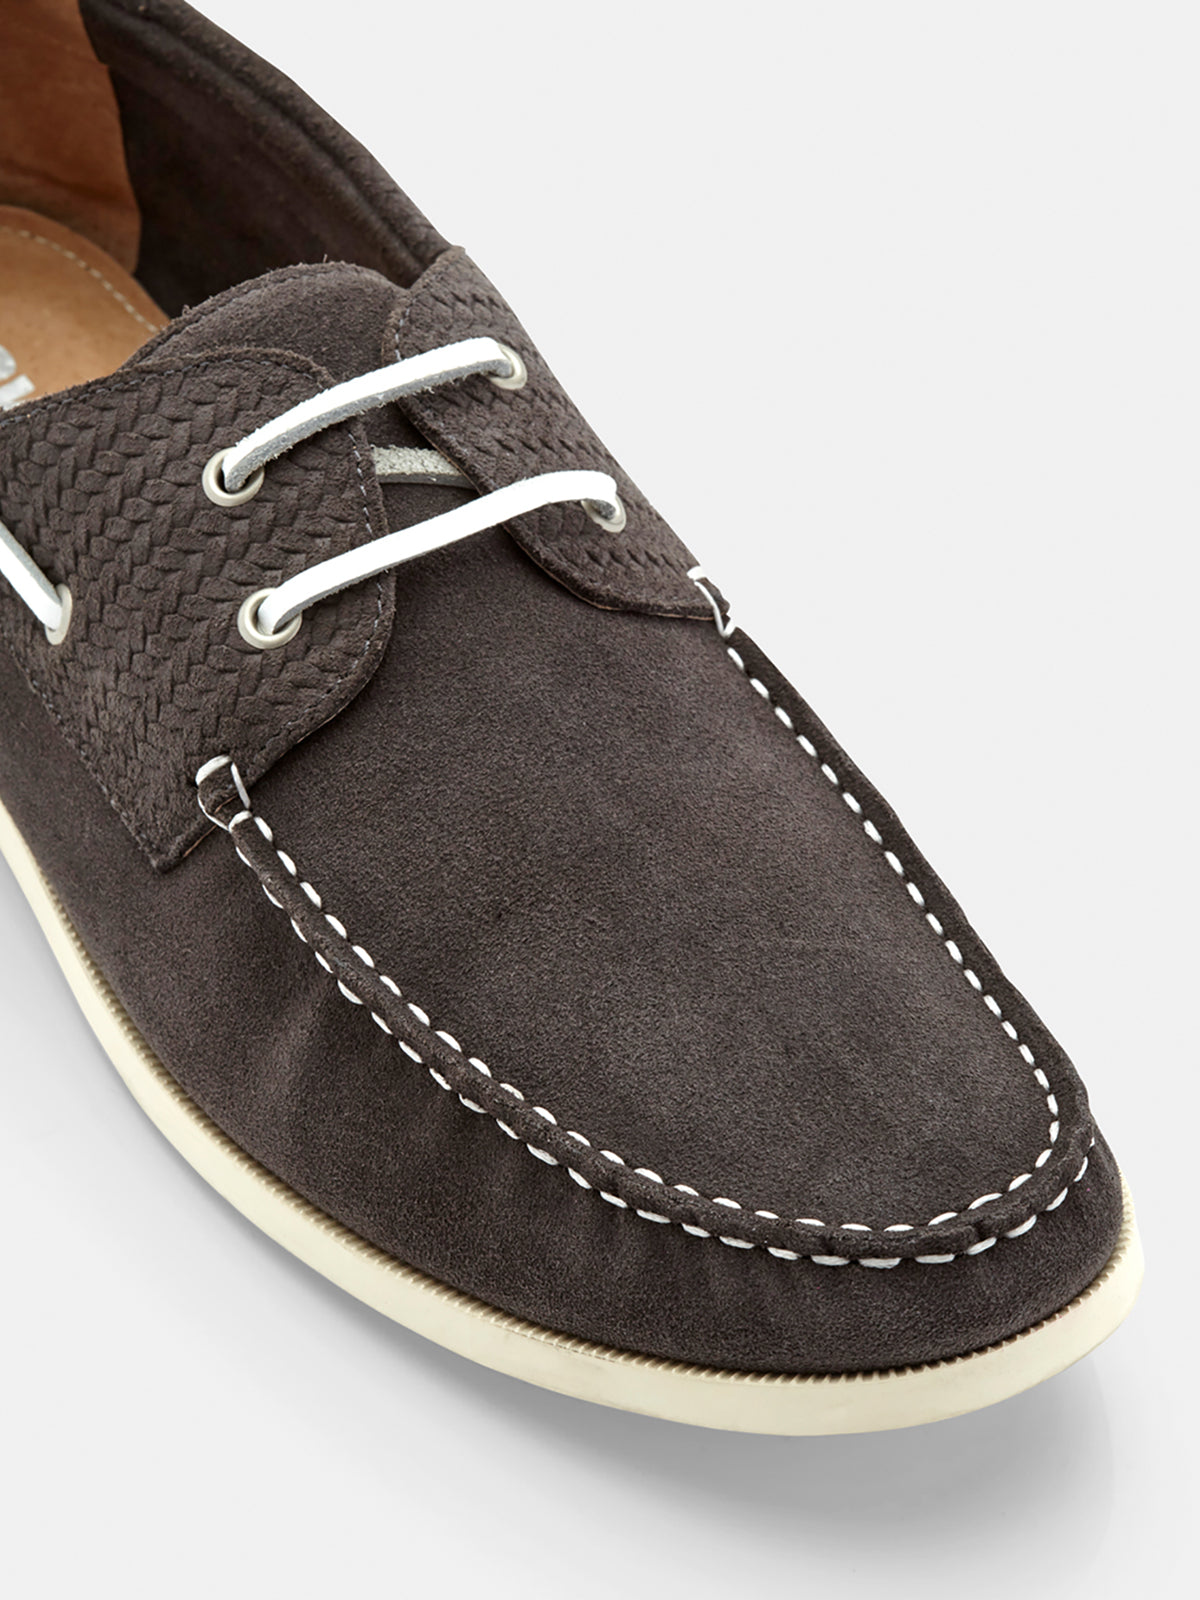 ADAM SUEDE BOATER MENS SHOES